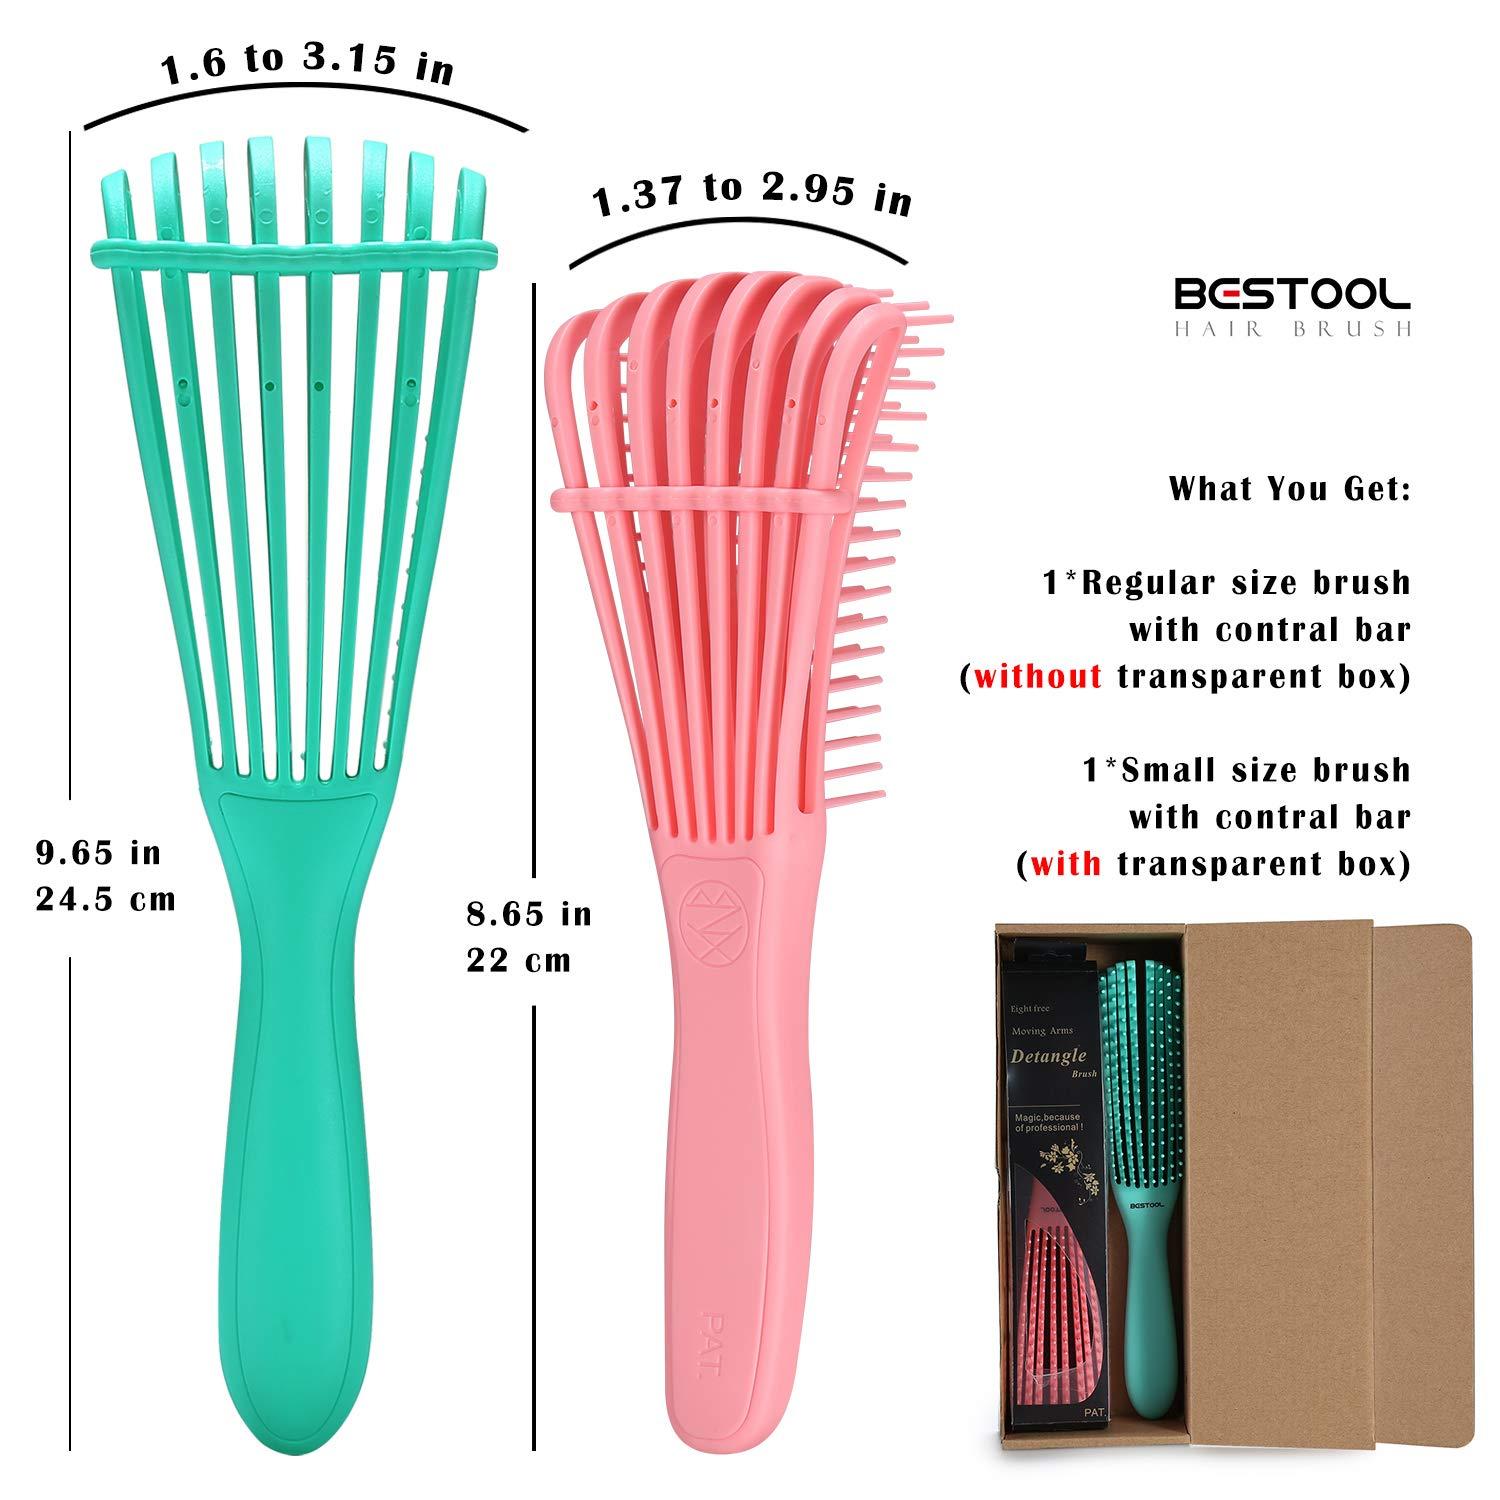 2Pack BESTOOL Detangling Brush for Black Natural Hair, Detangle Brush for  Curly Hair, Faster n Easier Detangler Brush for Detangle Wet Dry 3/4abc  Curly, Coily, Kinky Hair Without Damage (Green, Pink)